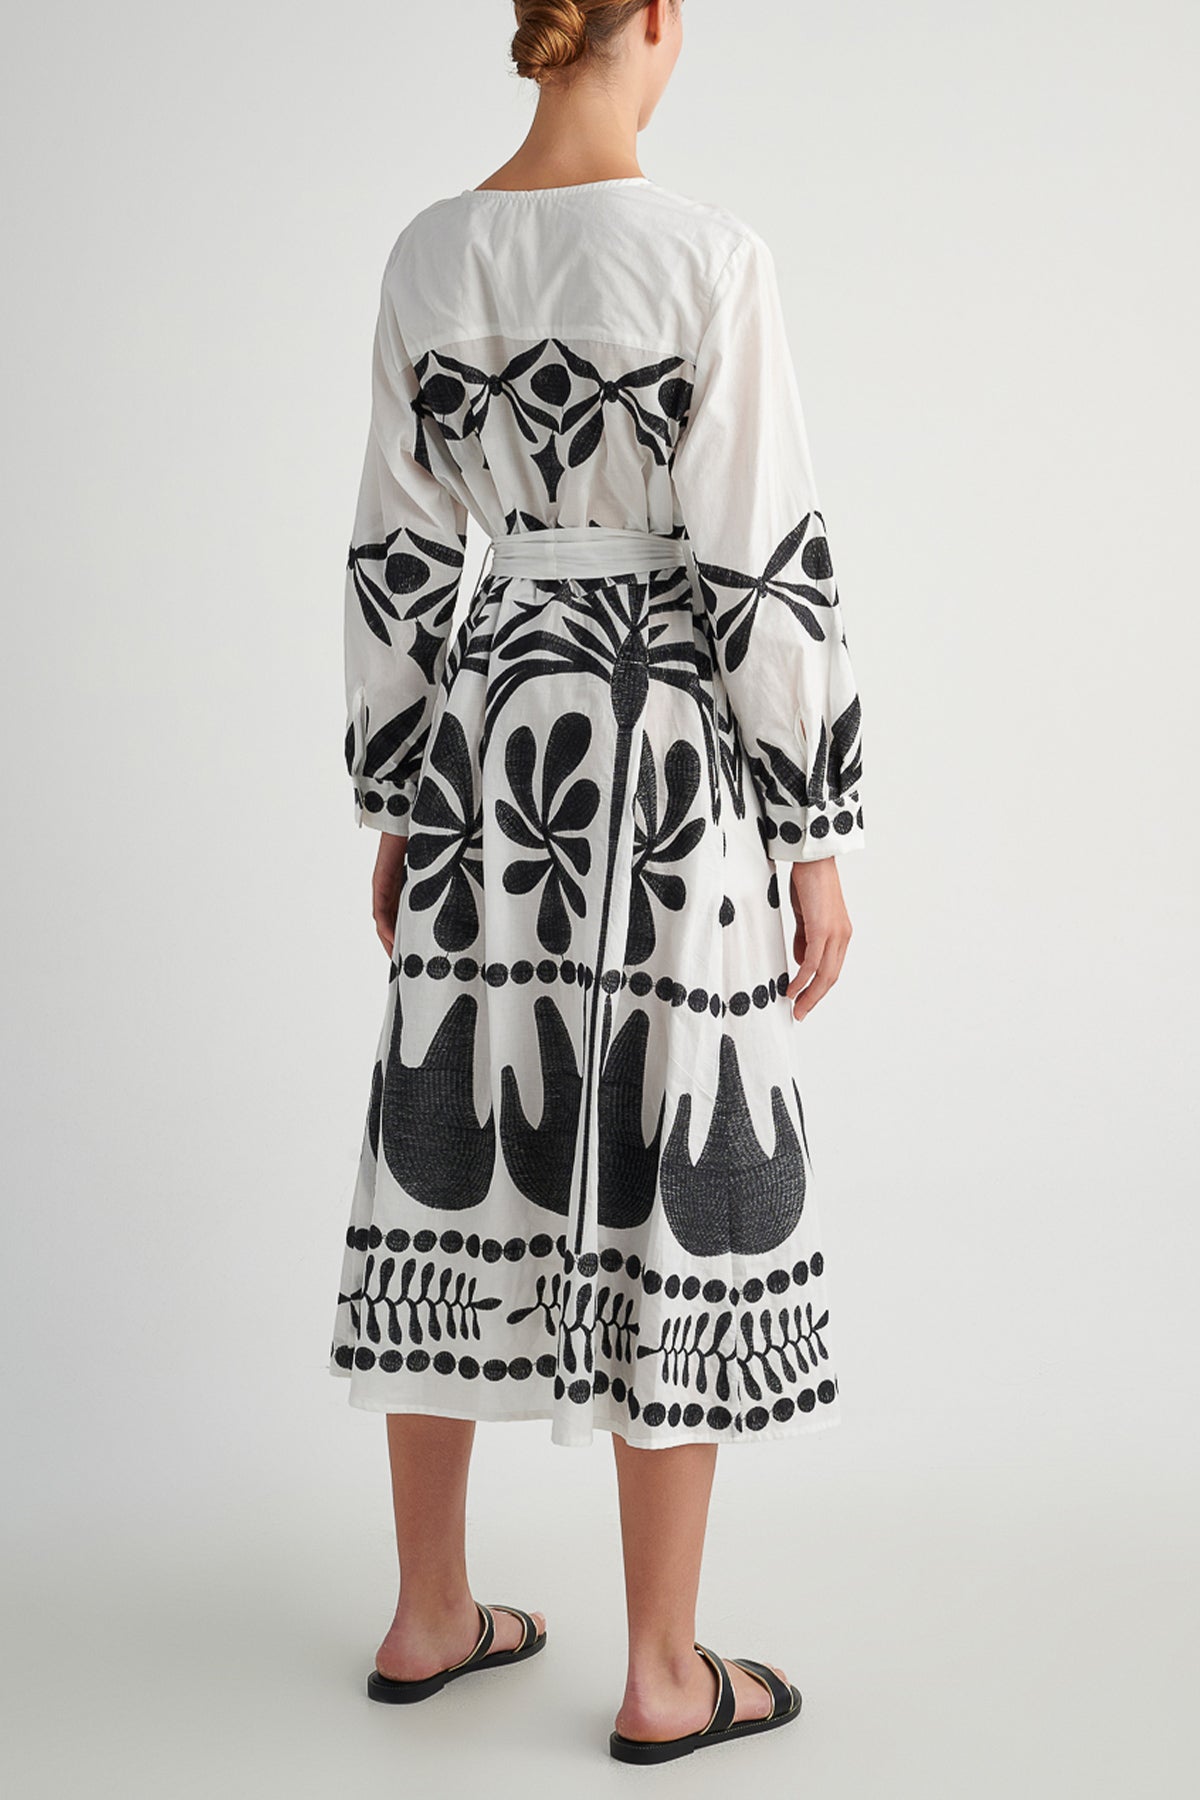 EMBROIDERED MIDI DRESS "ITHACA"